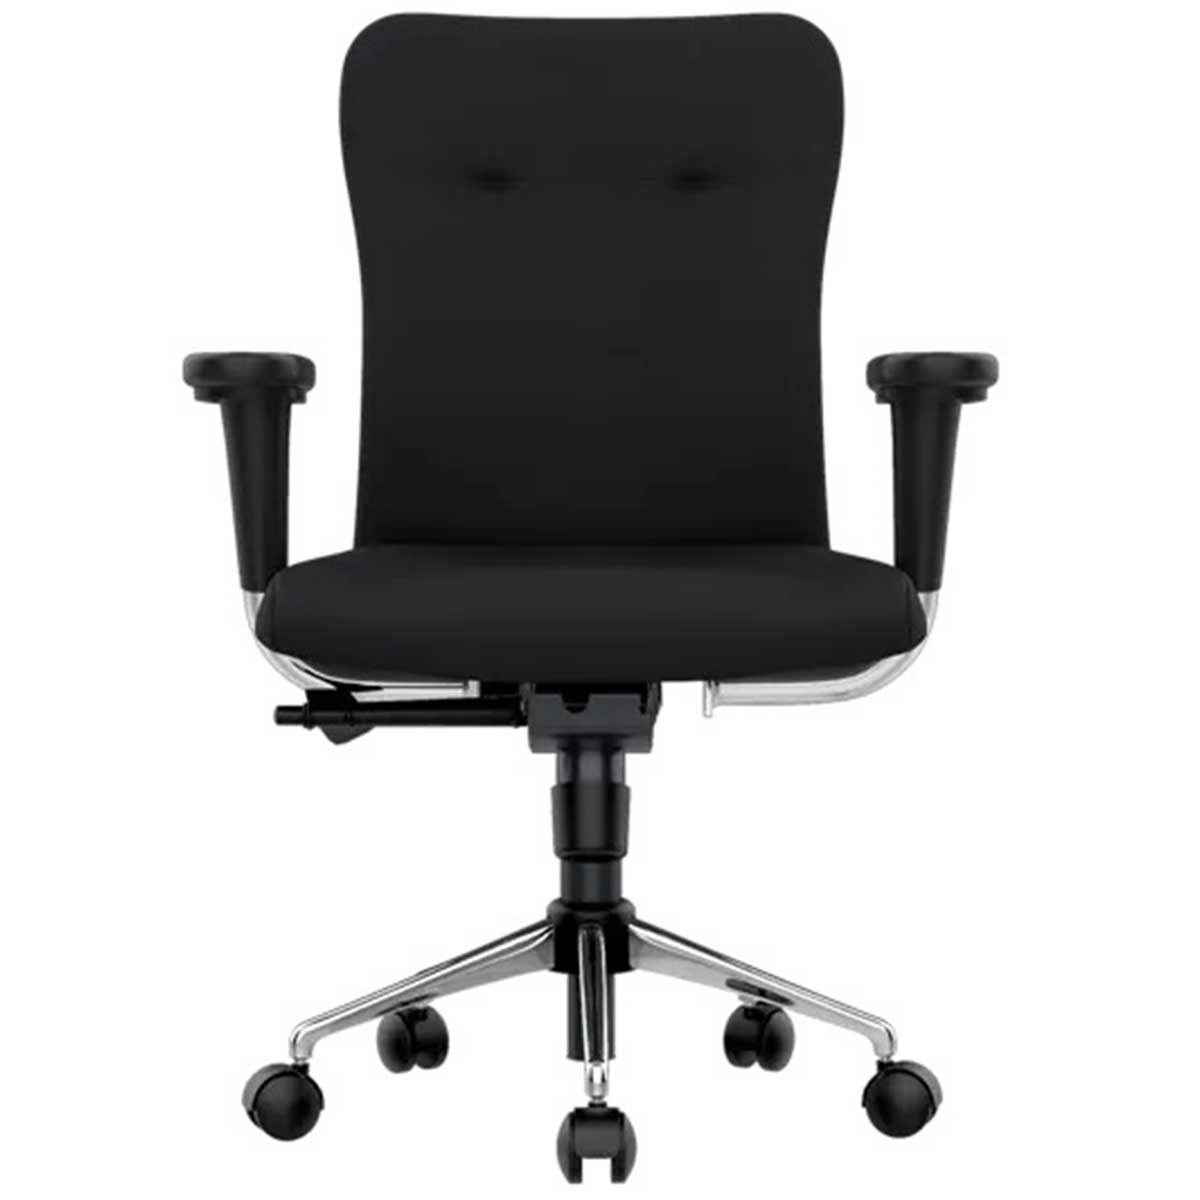 Fabric Office Chair Manufacturers, Suppliers in Noida Sector 78